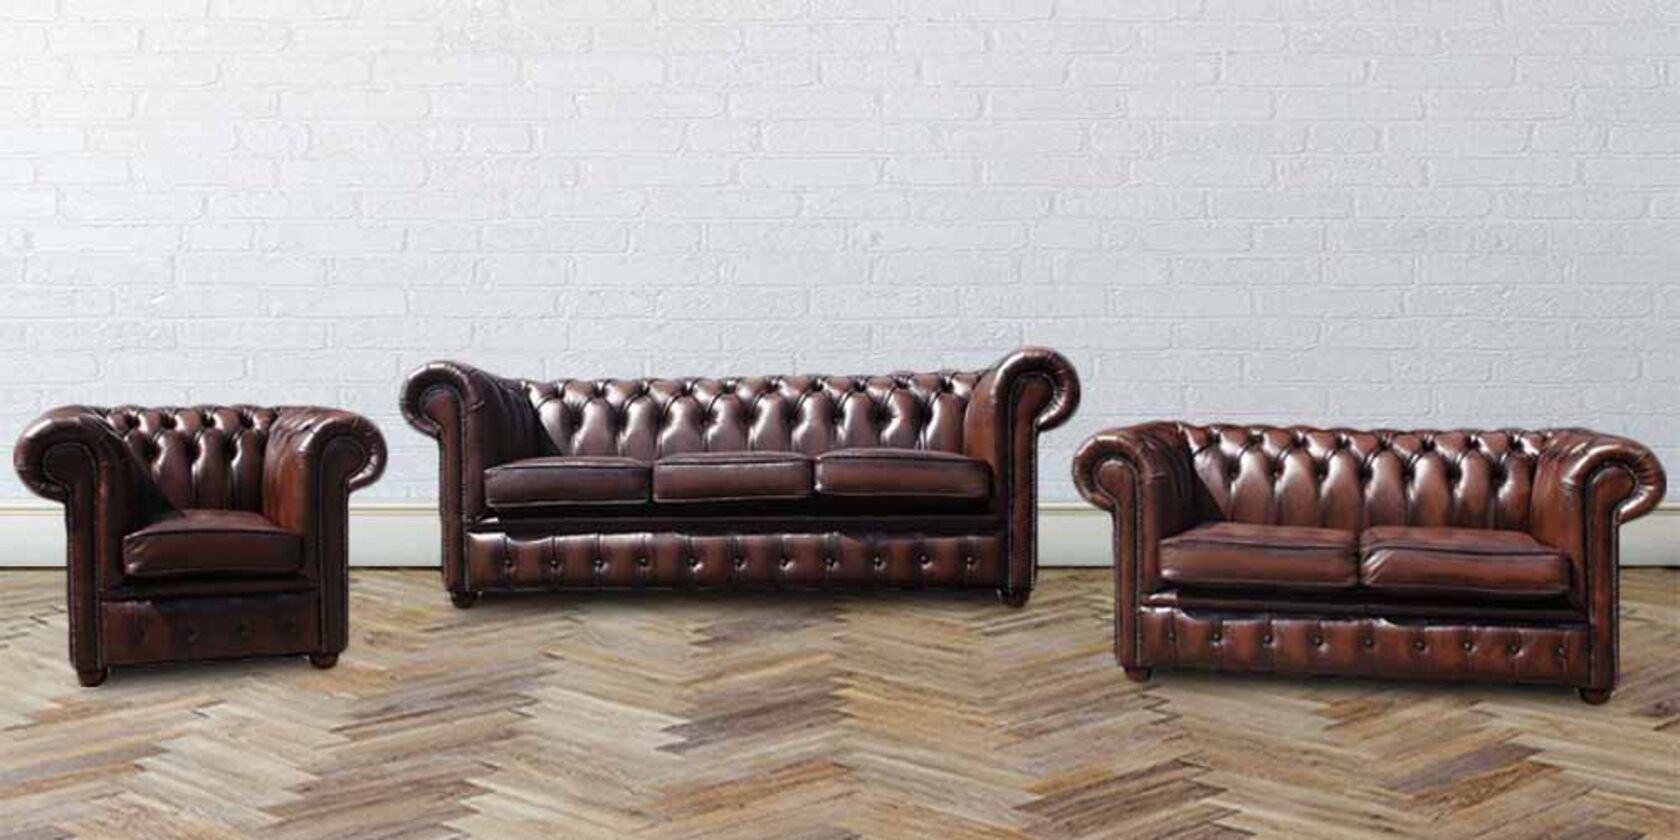 Chesterfield 3 2 1 Seater Real Antique, Leather Sofa 3 2 1